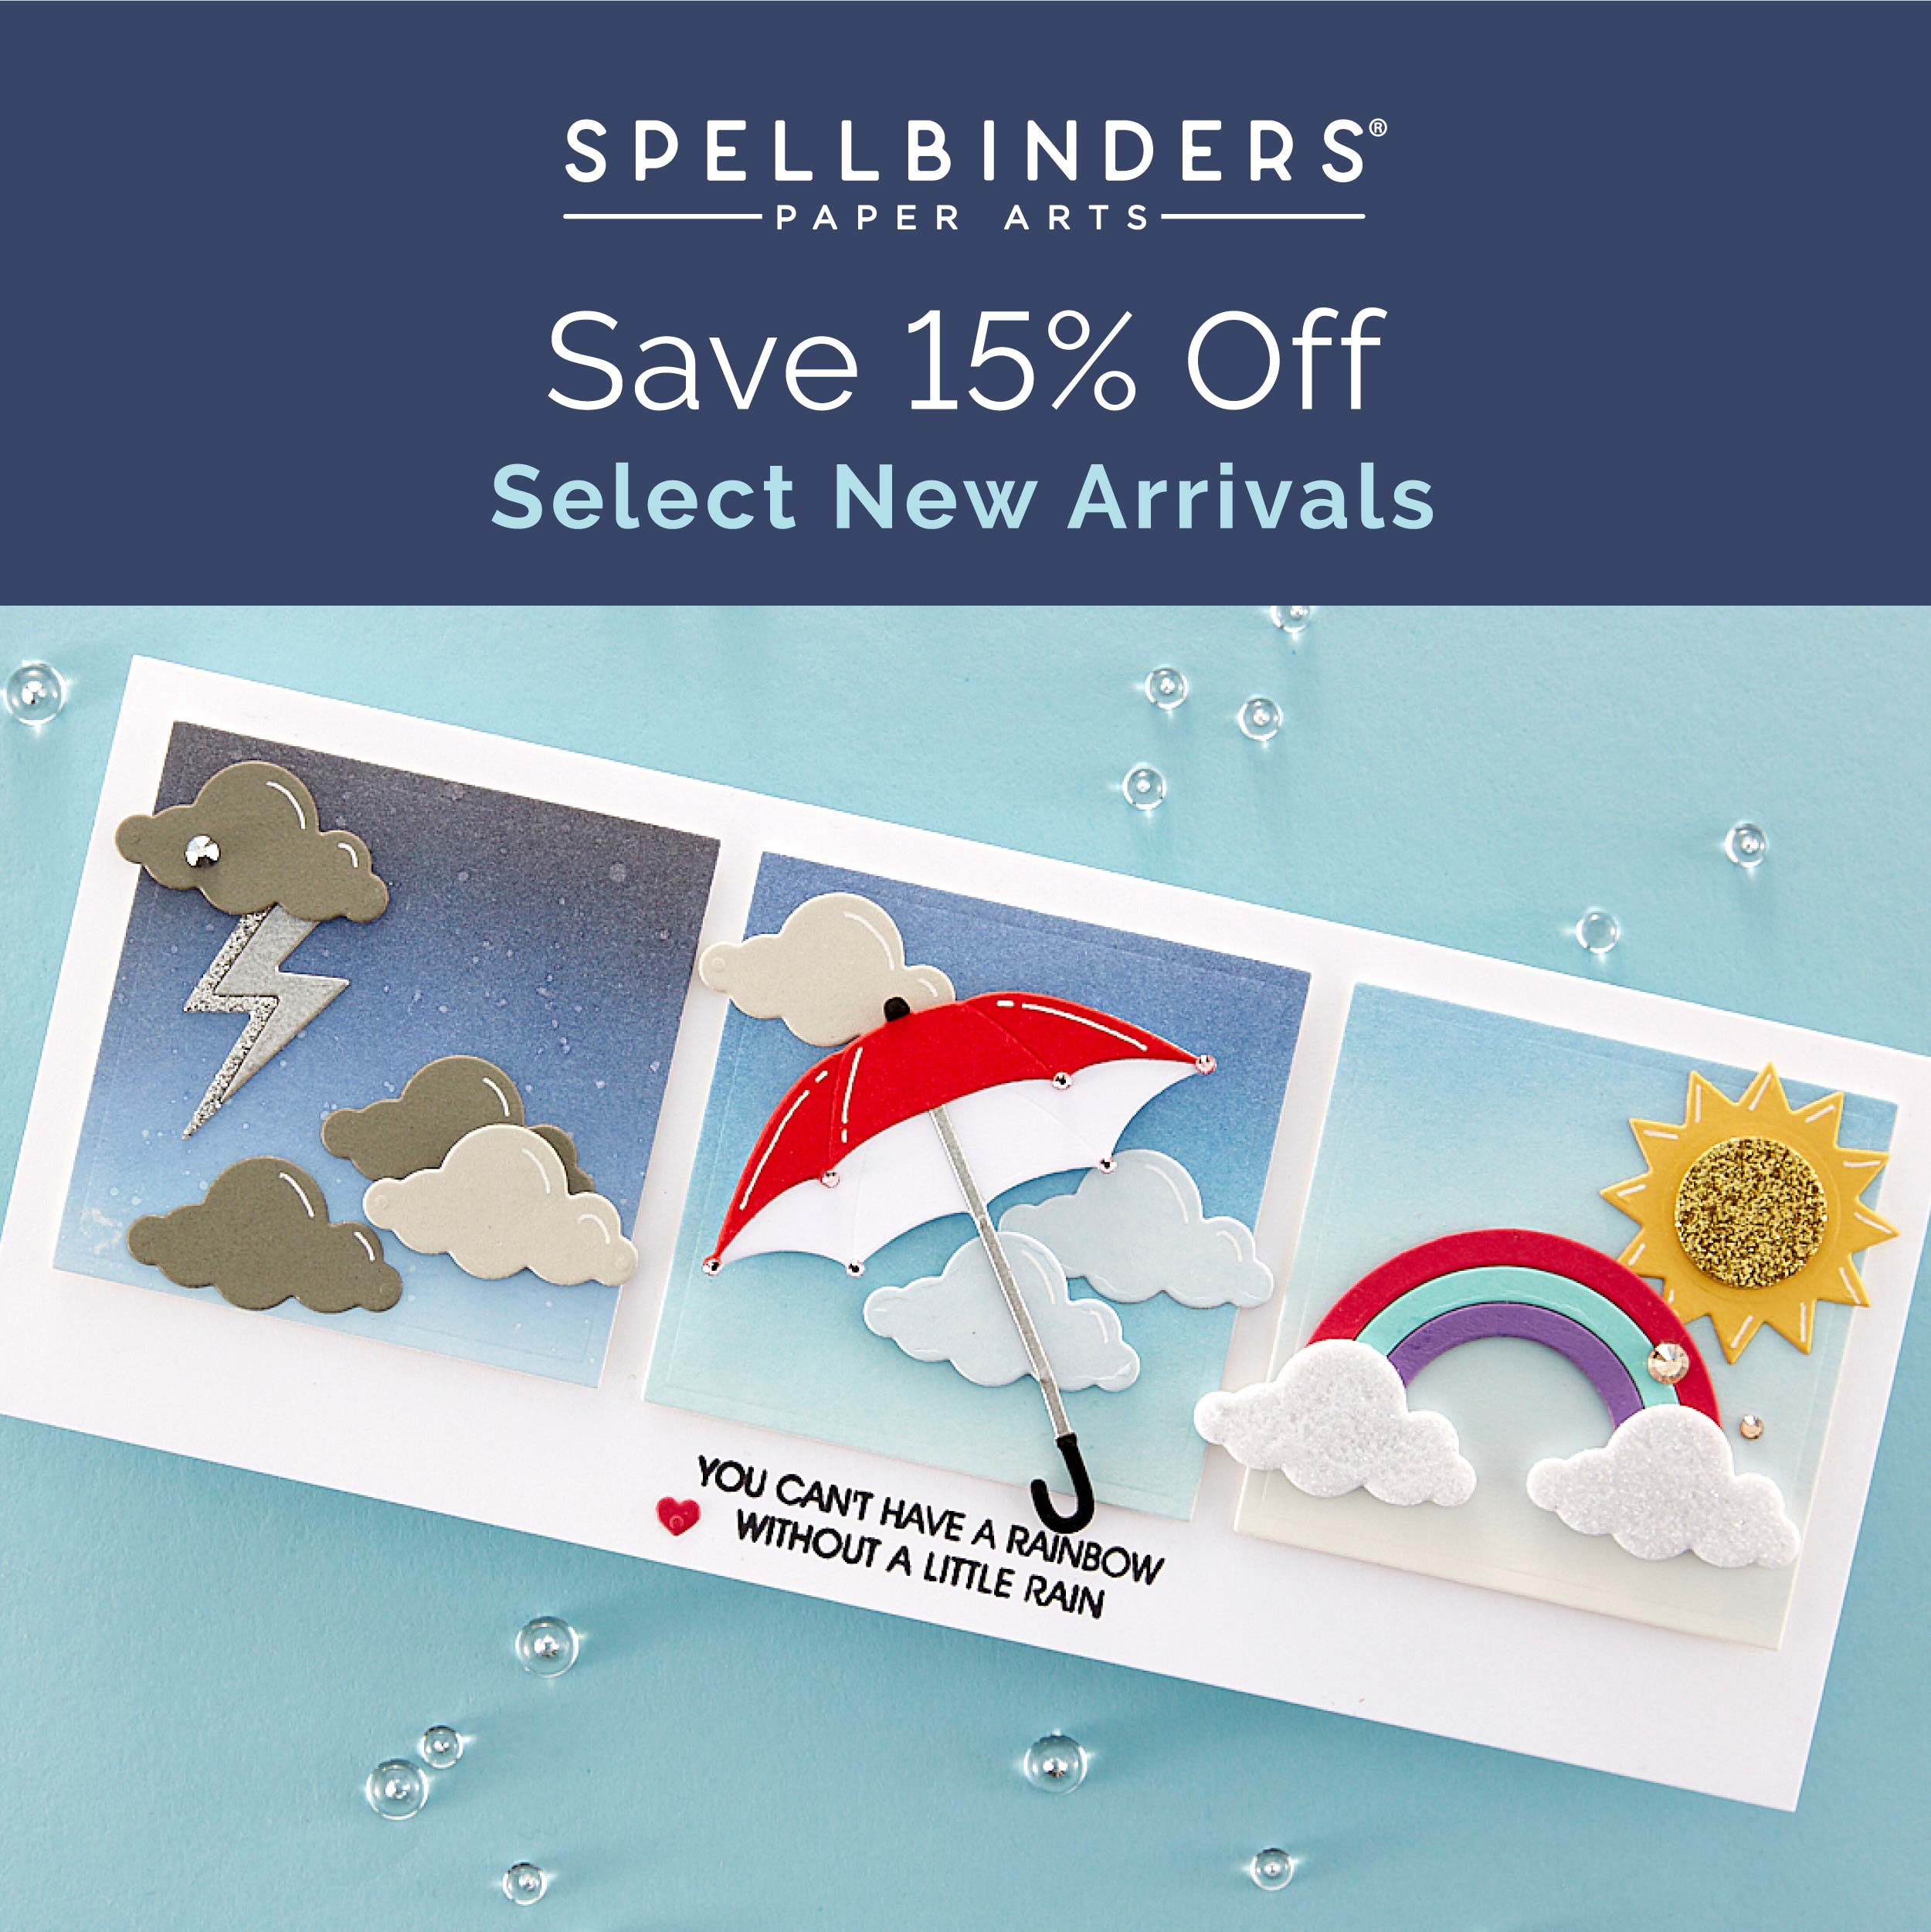 Spellbinders | Save 15% Off Select New Arrivals!